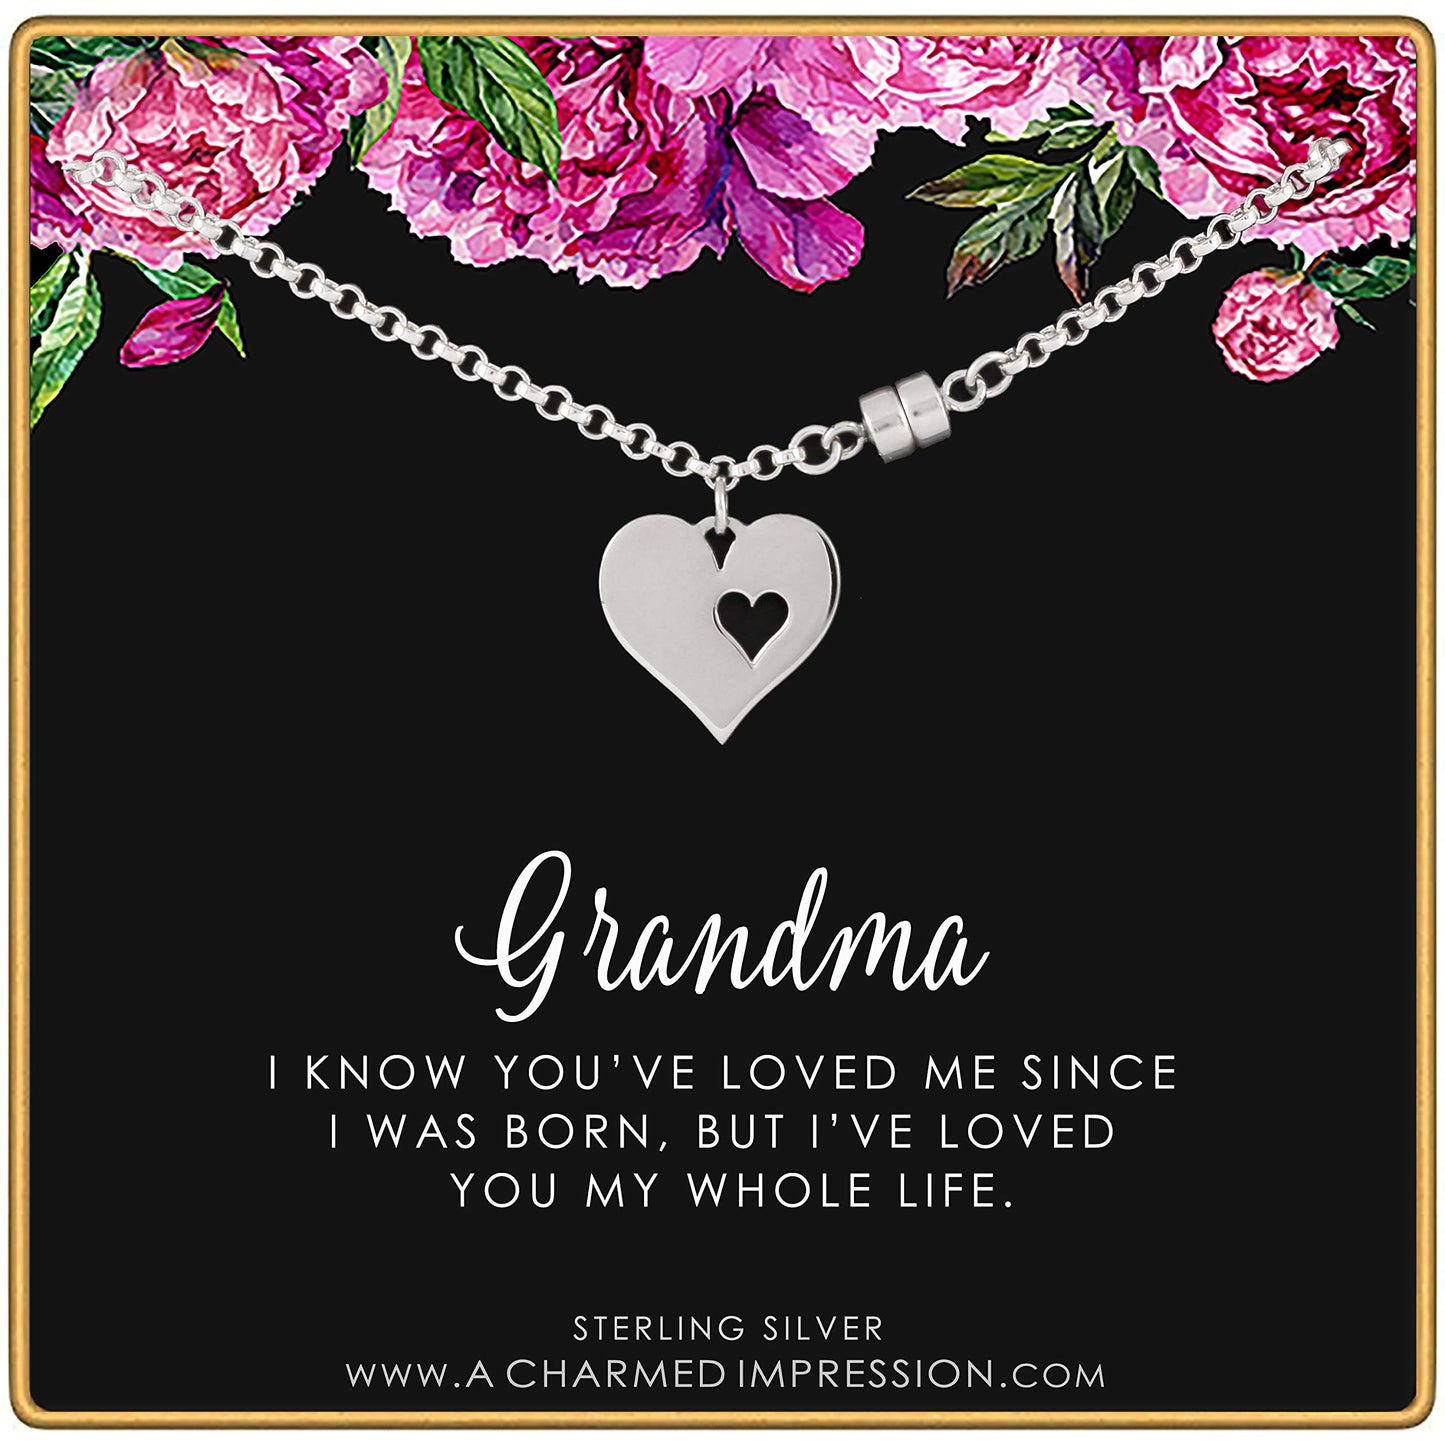 Gift for Grandma • Grandma Gifts from Grandchildren • Sterling Silver • Gift from Granddaughter Grandson • Two Heart Charm Bracelet Magnetic Clasp • Grandmother Jewelry Unique Grandma Gift Christmas